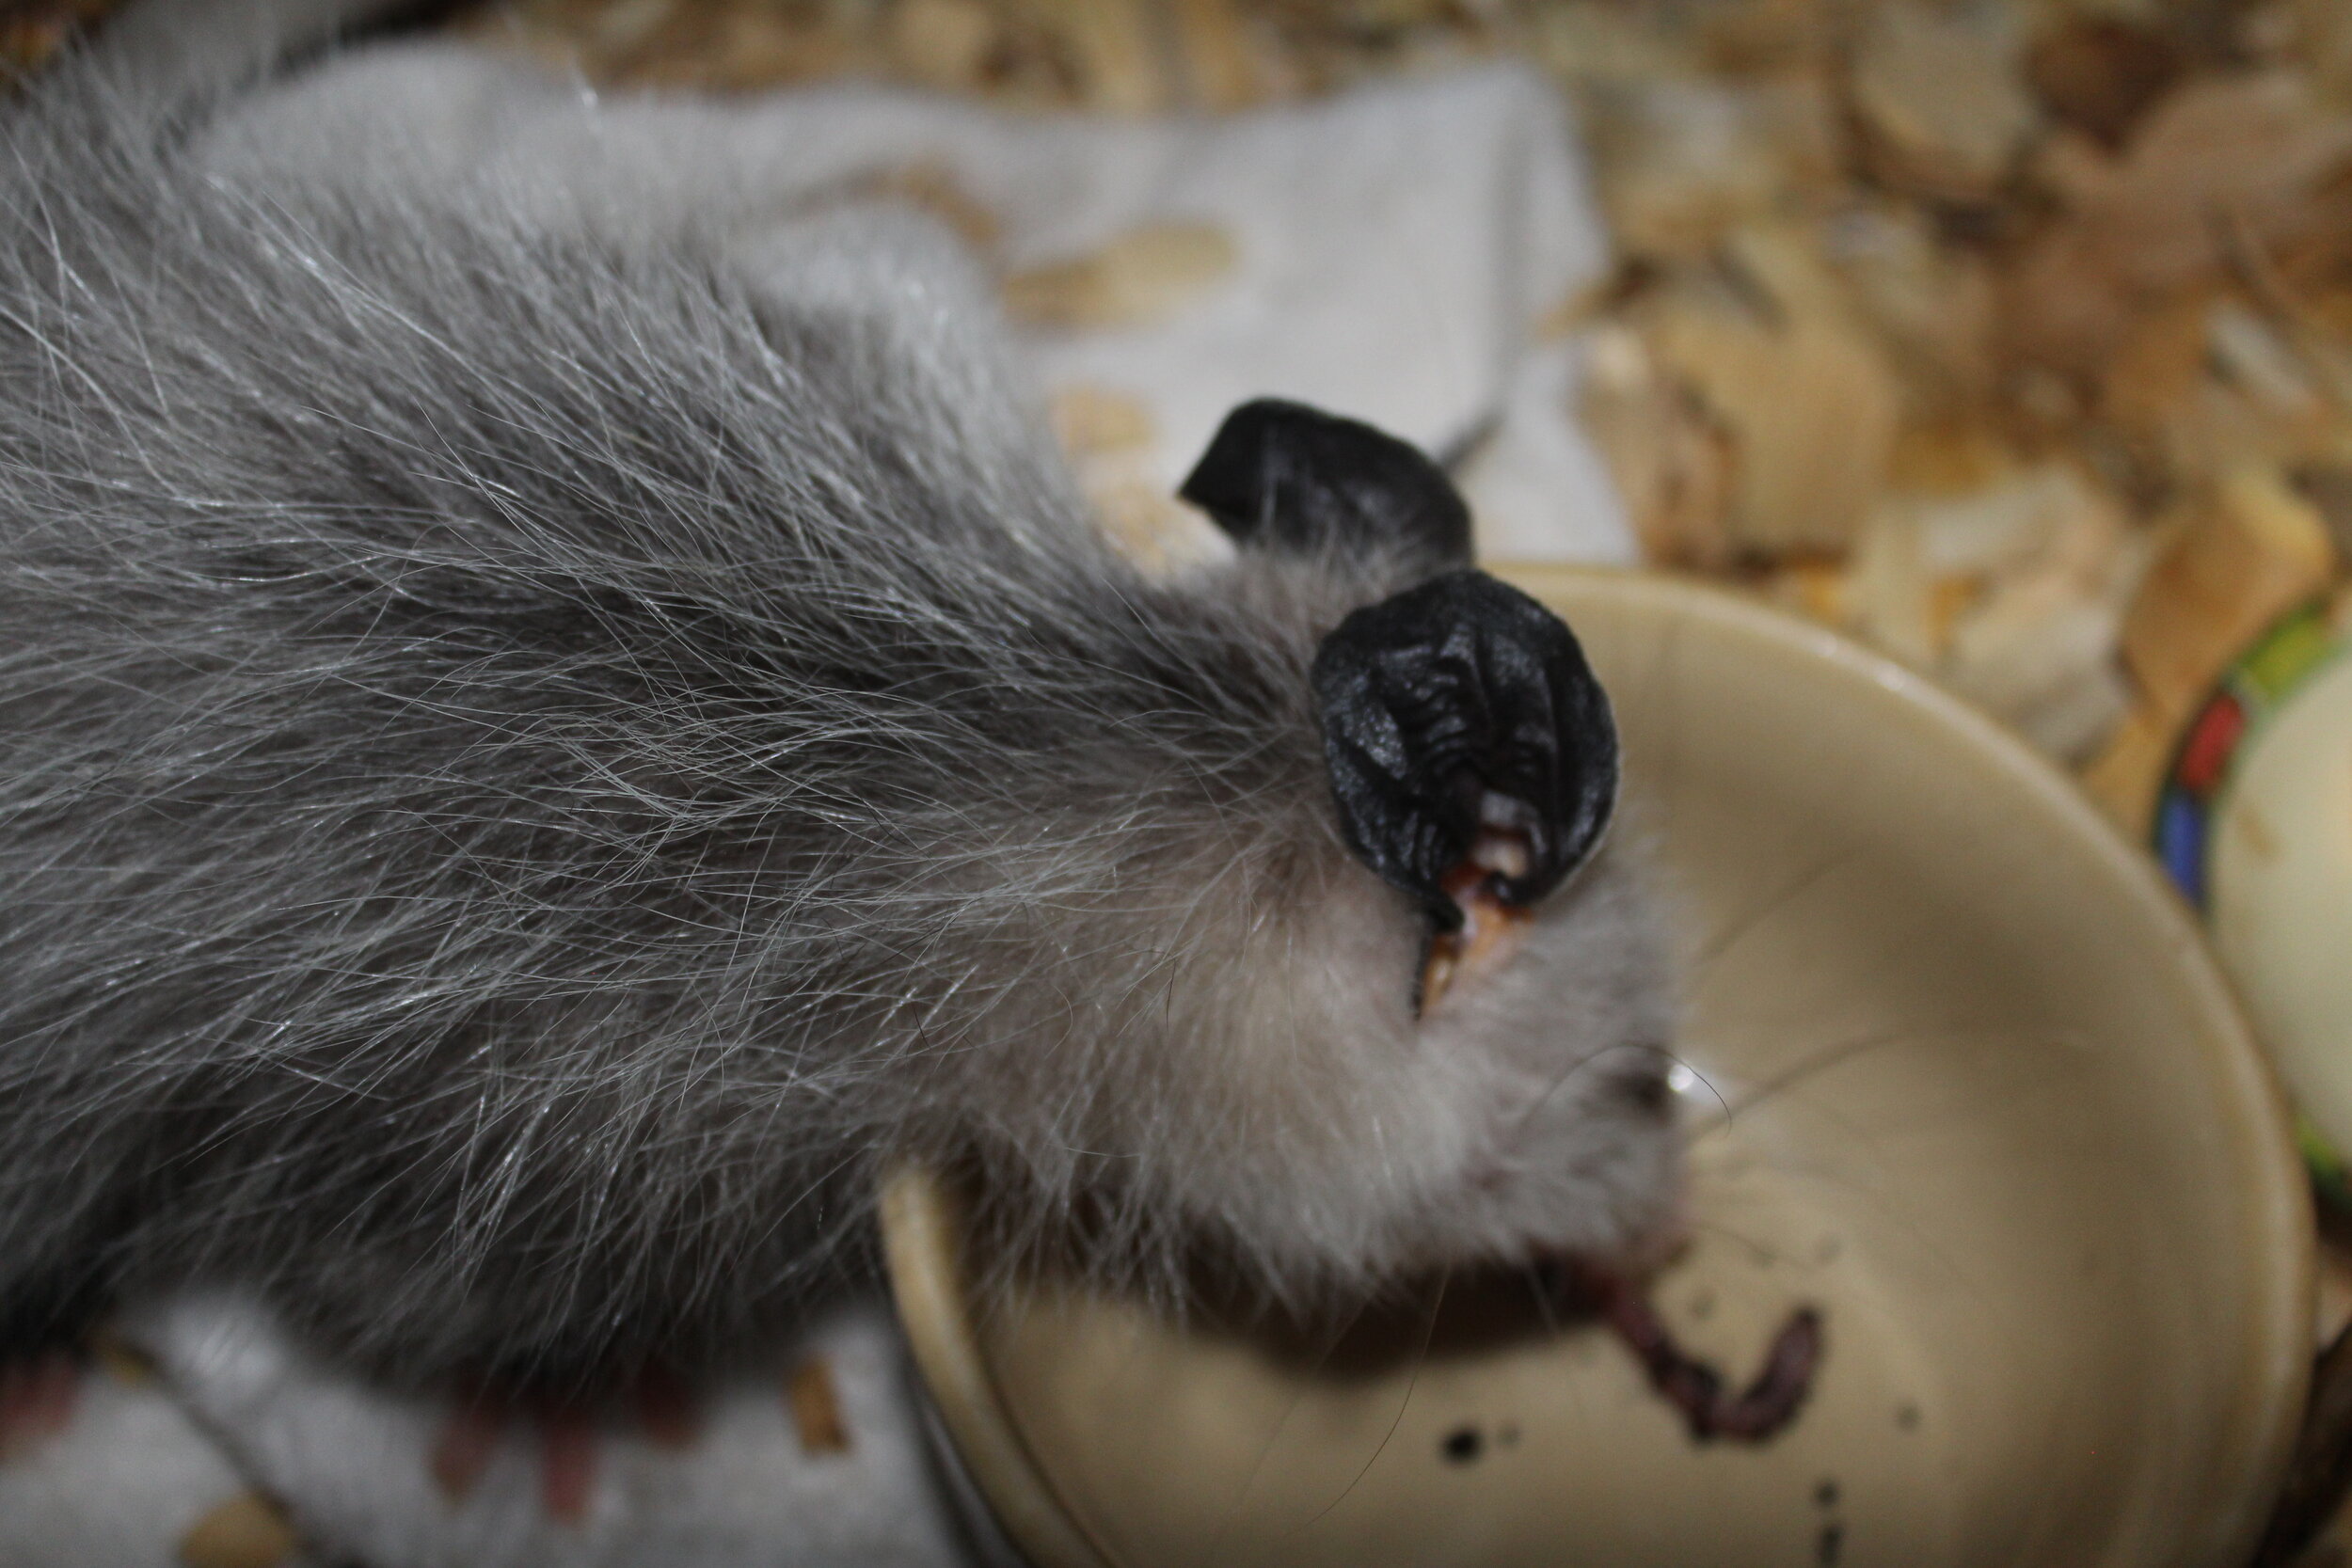 We provide our rehab possums with natural foods such as worms.